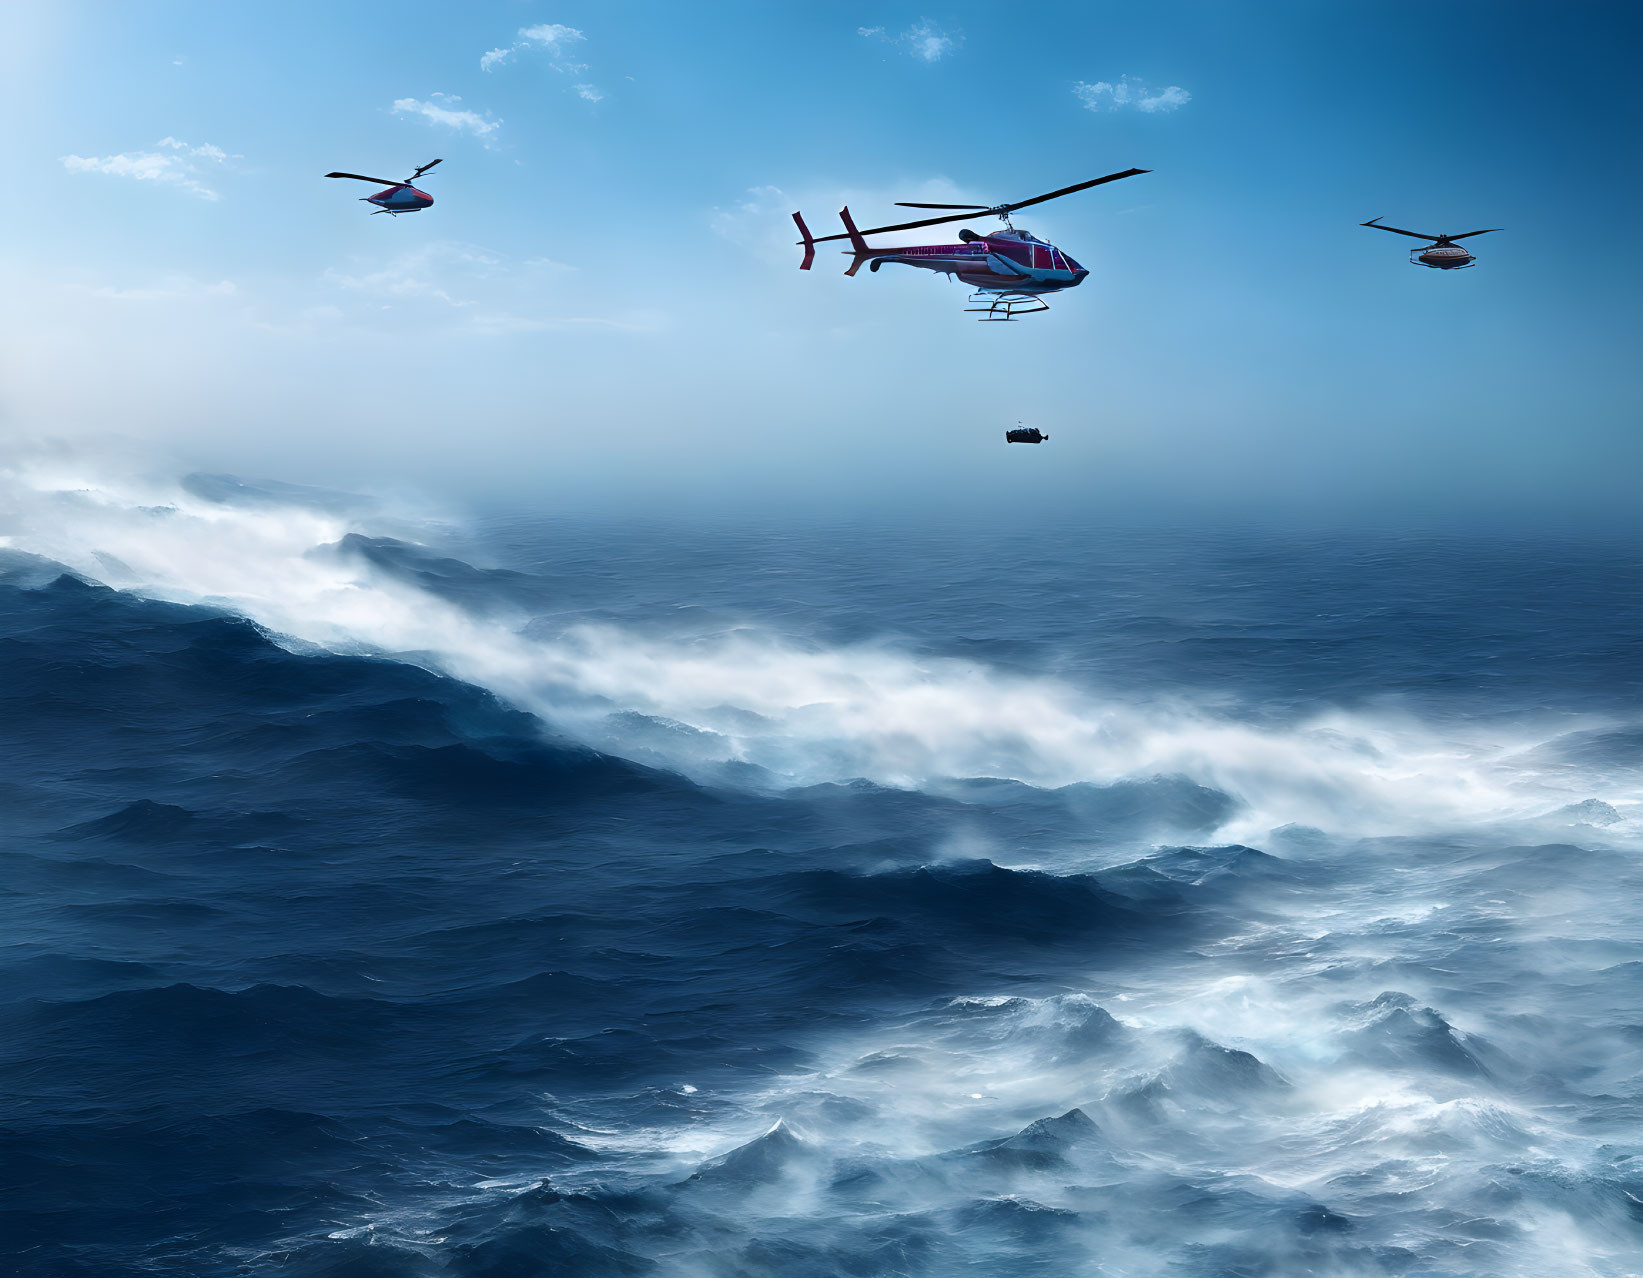 Three helicopters over turbulent ocean, one hoisting cargo box